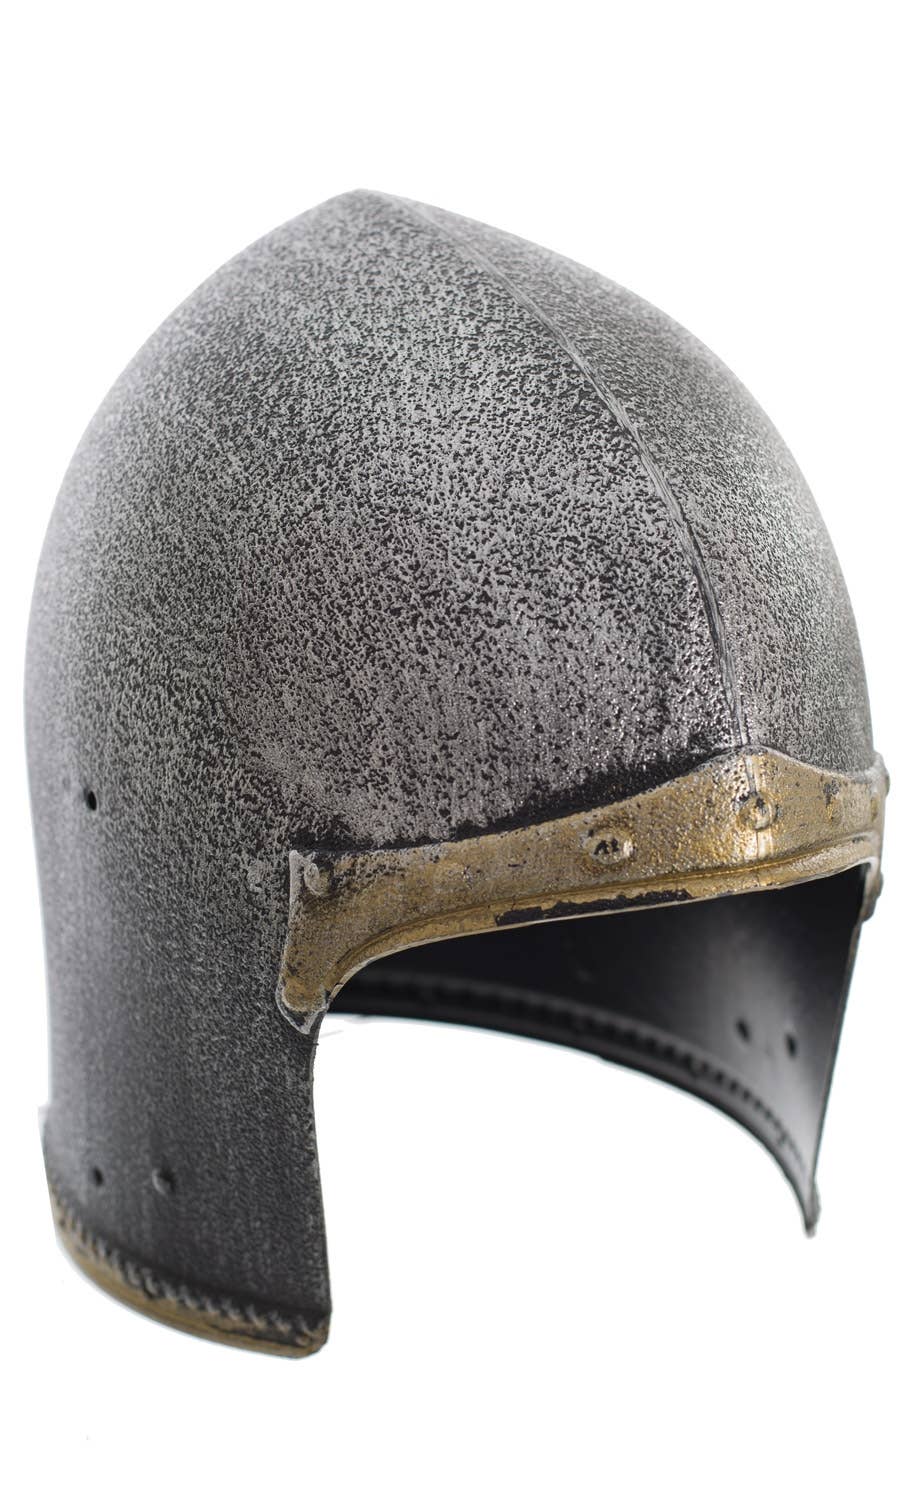 Silver and Gold Medieval Knight Costume Helmet